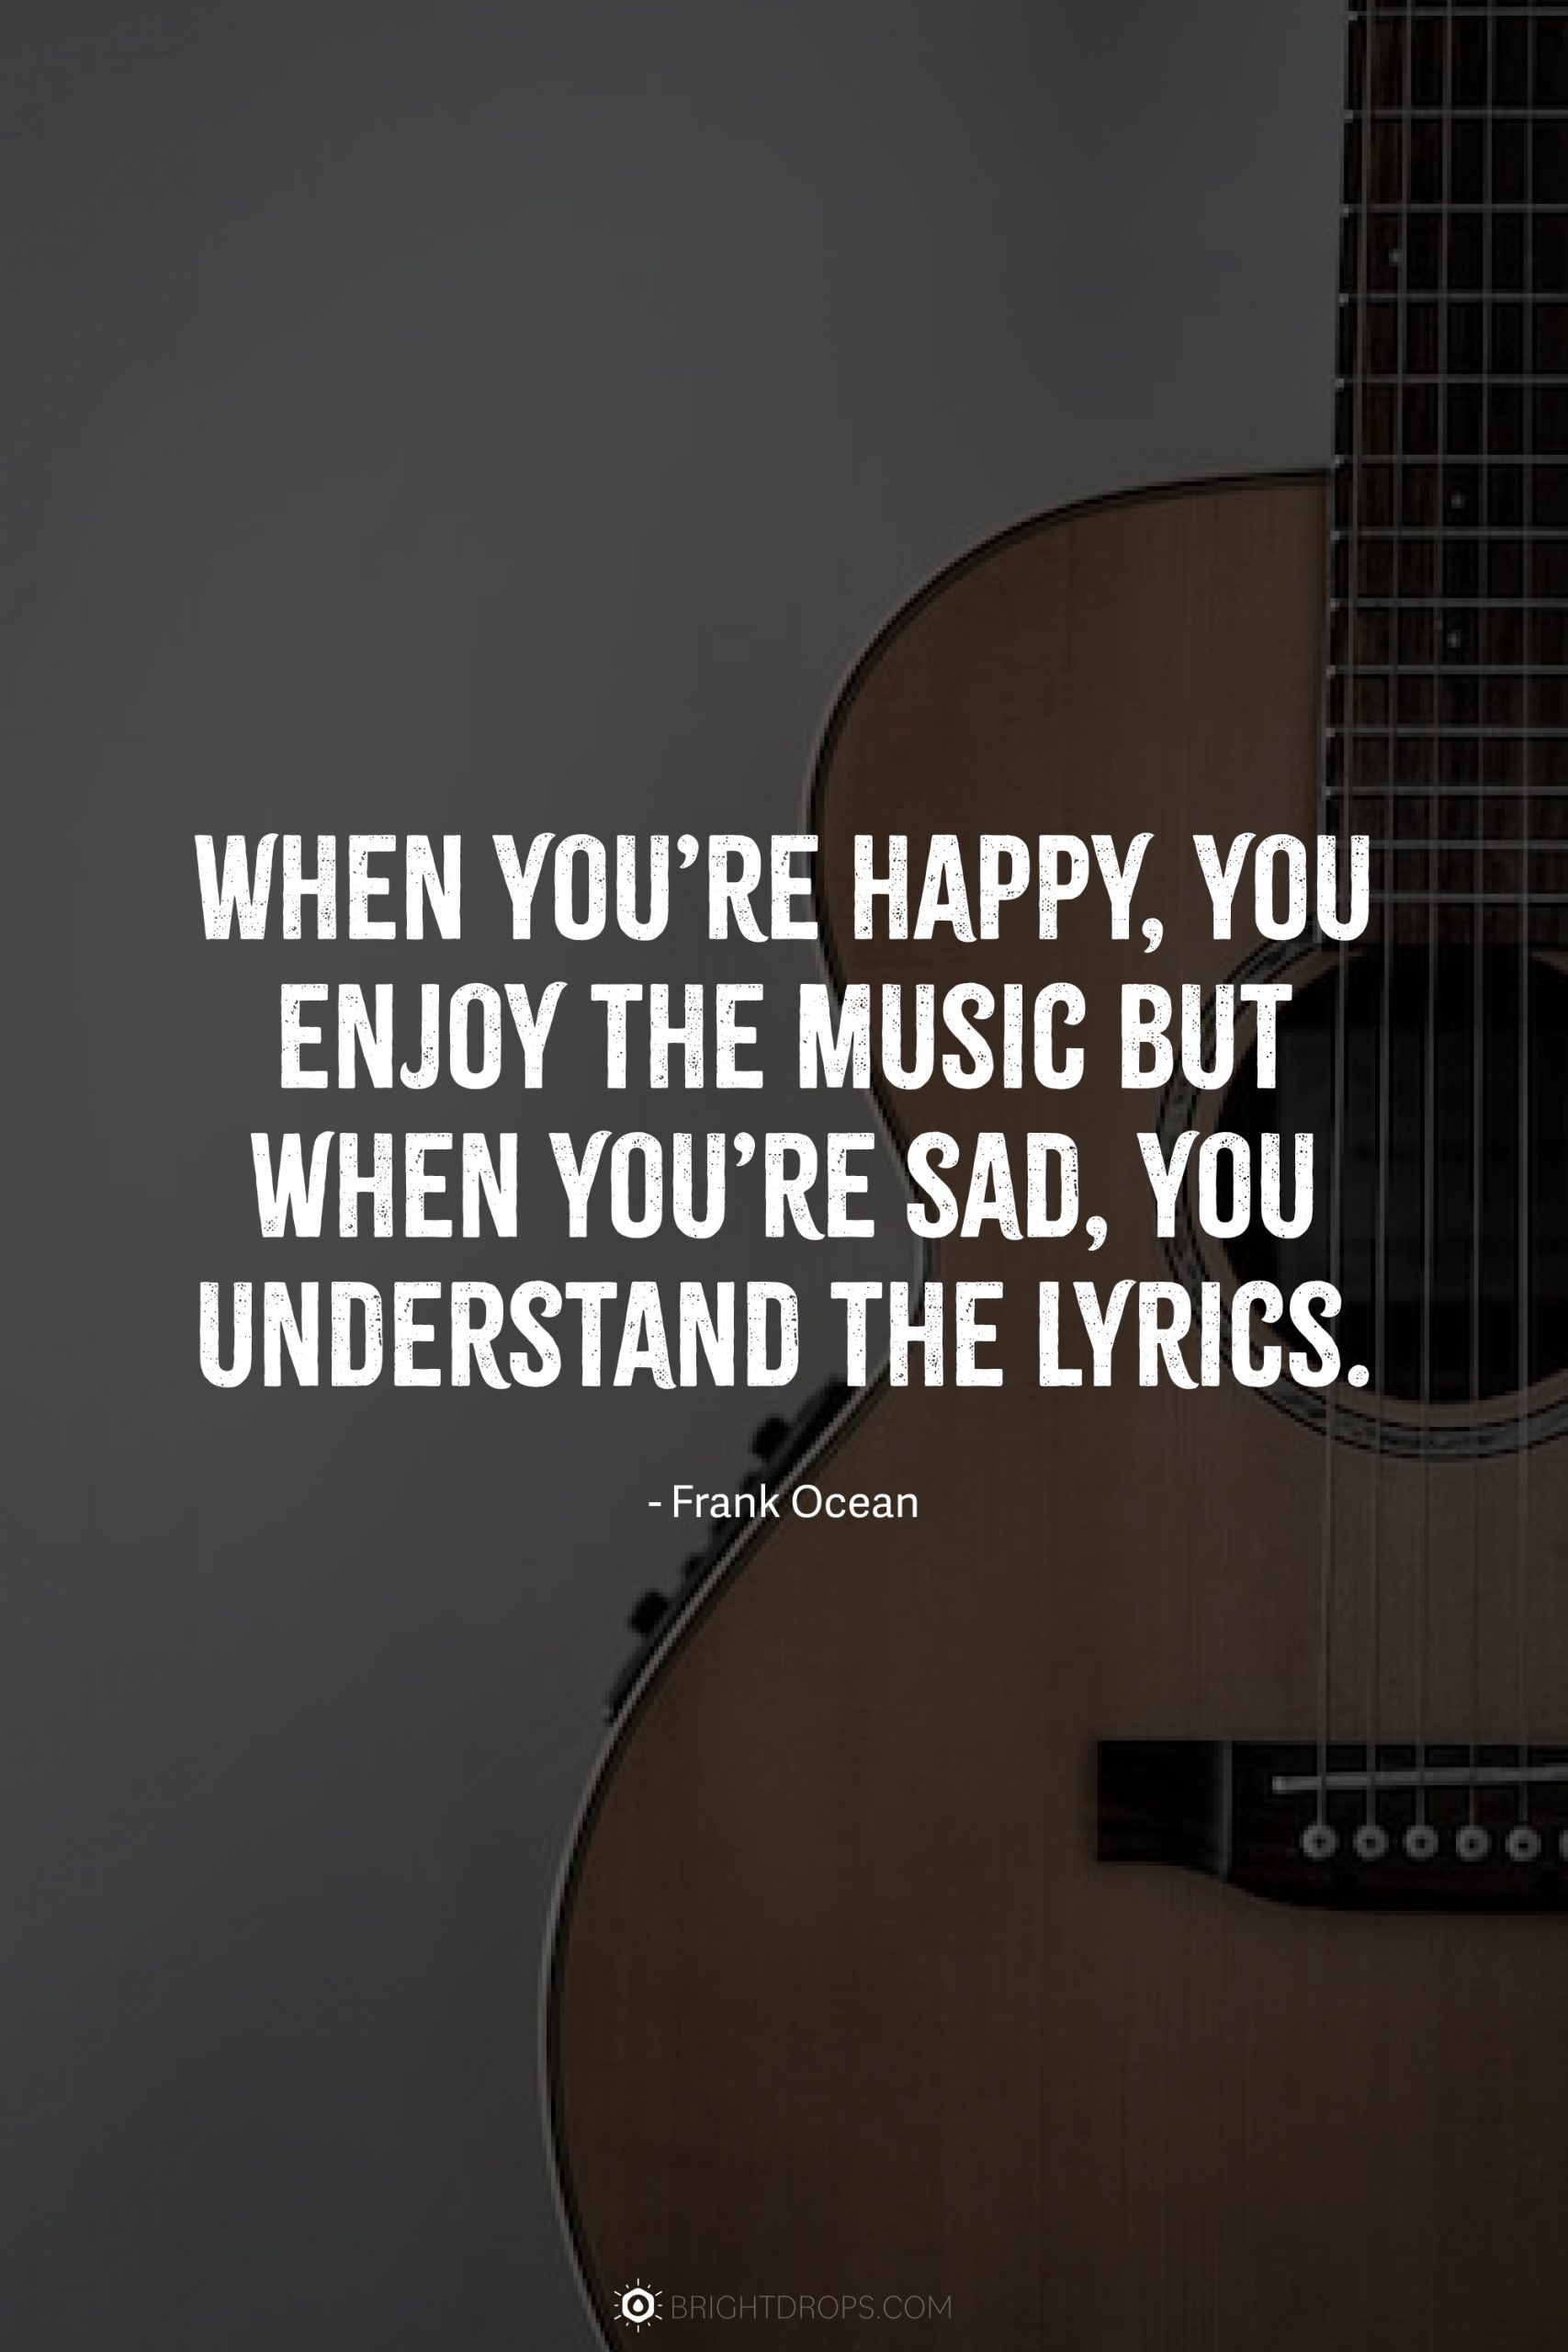 When you’re happy, you enjoy the music but when you’re sad, you understand the lyrics.